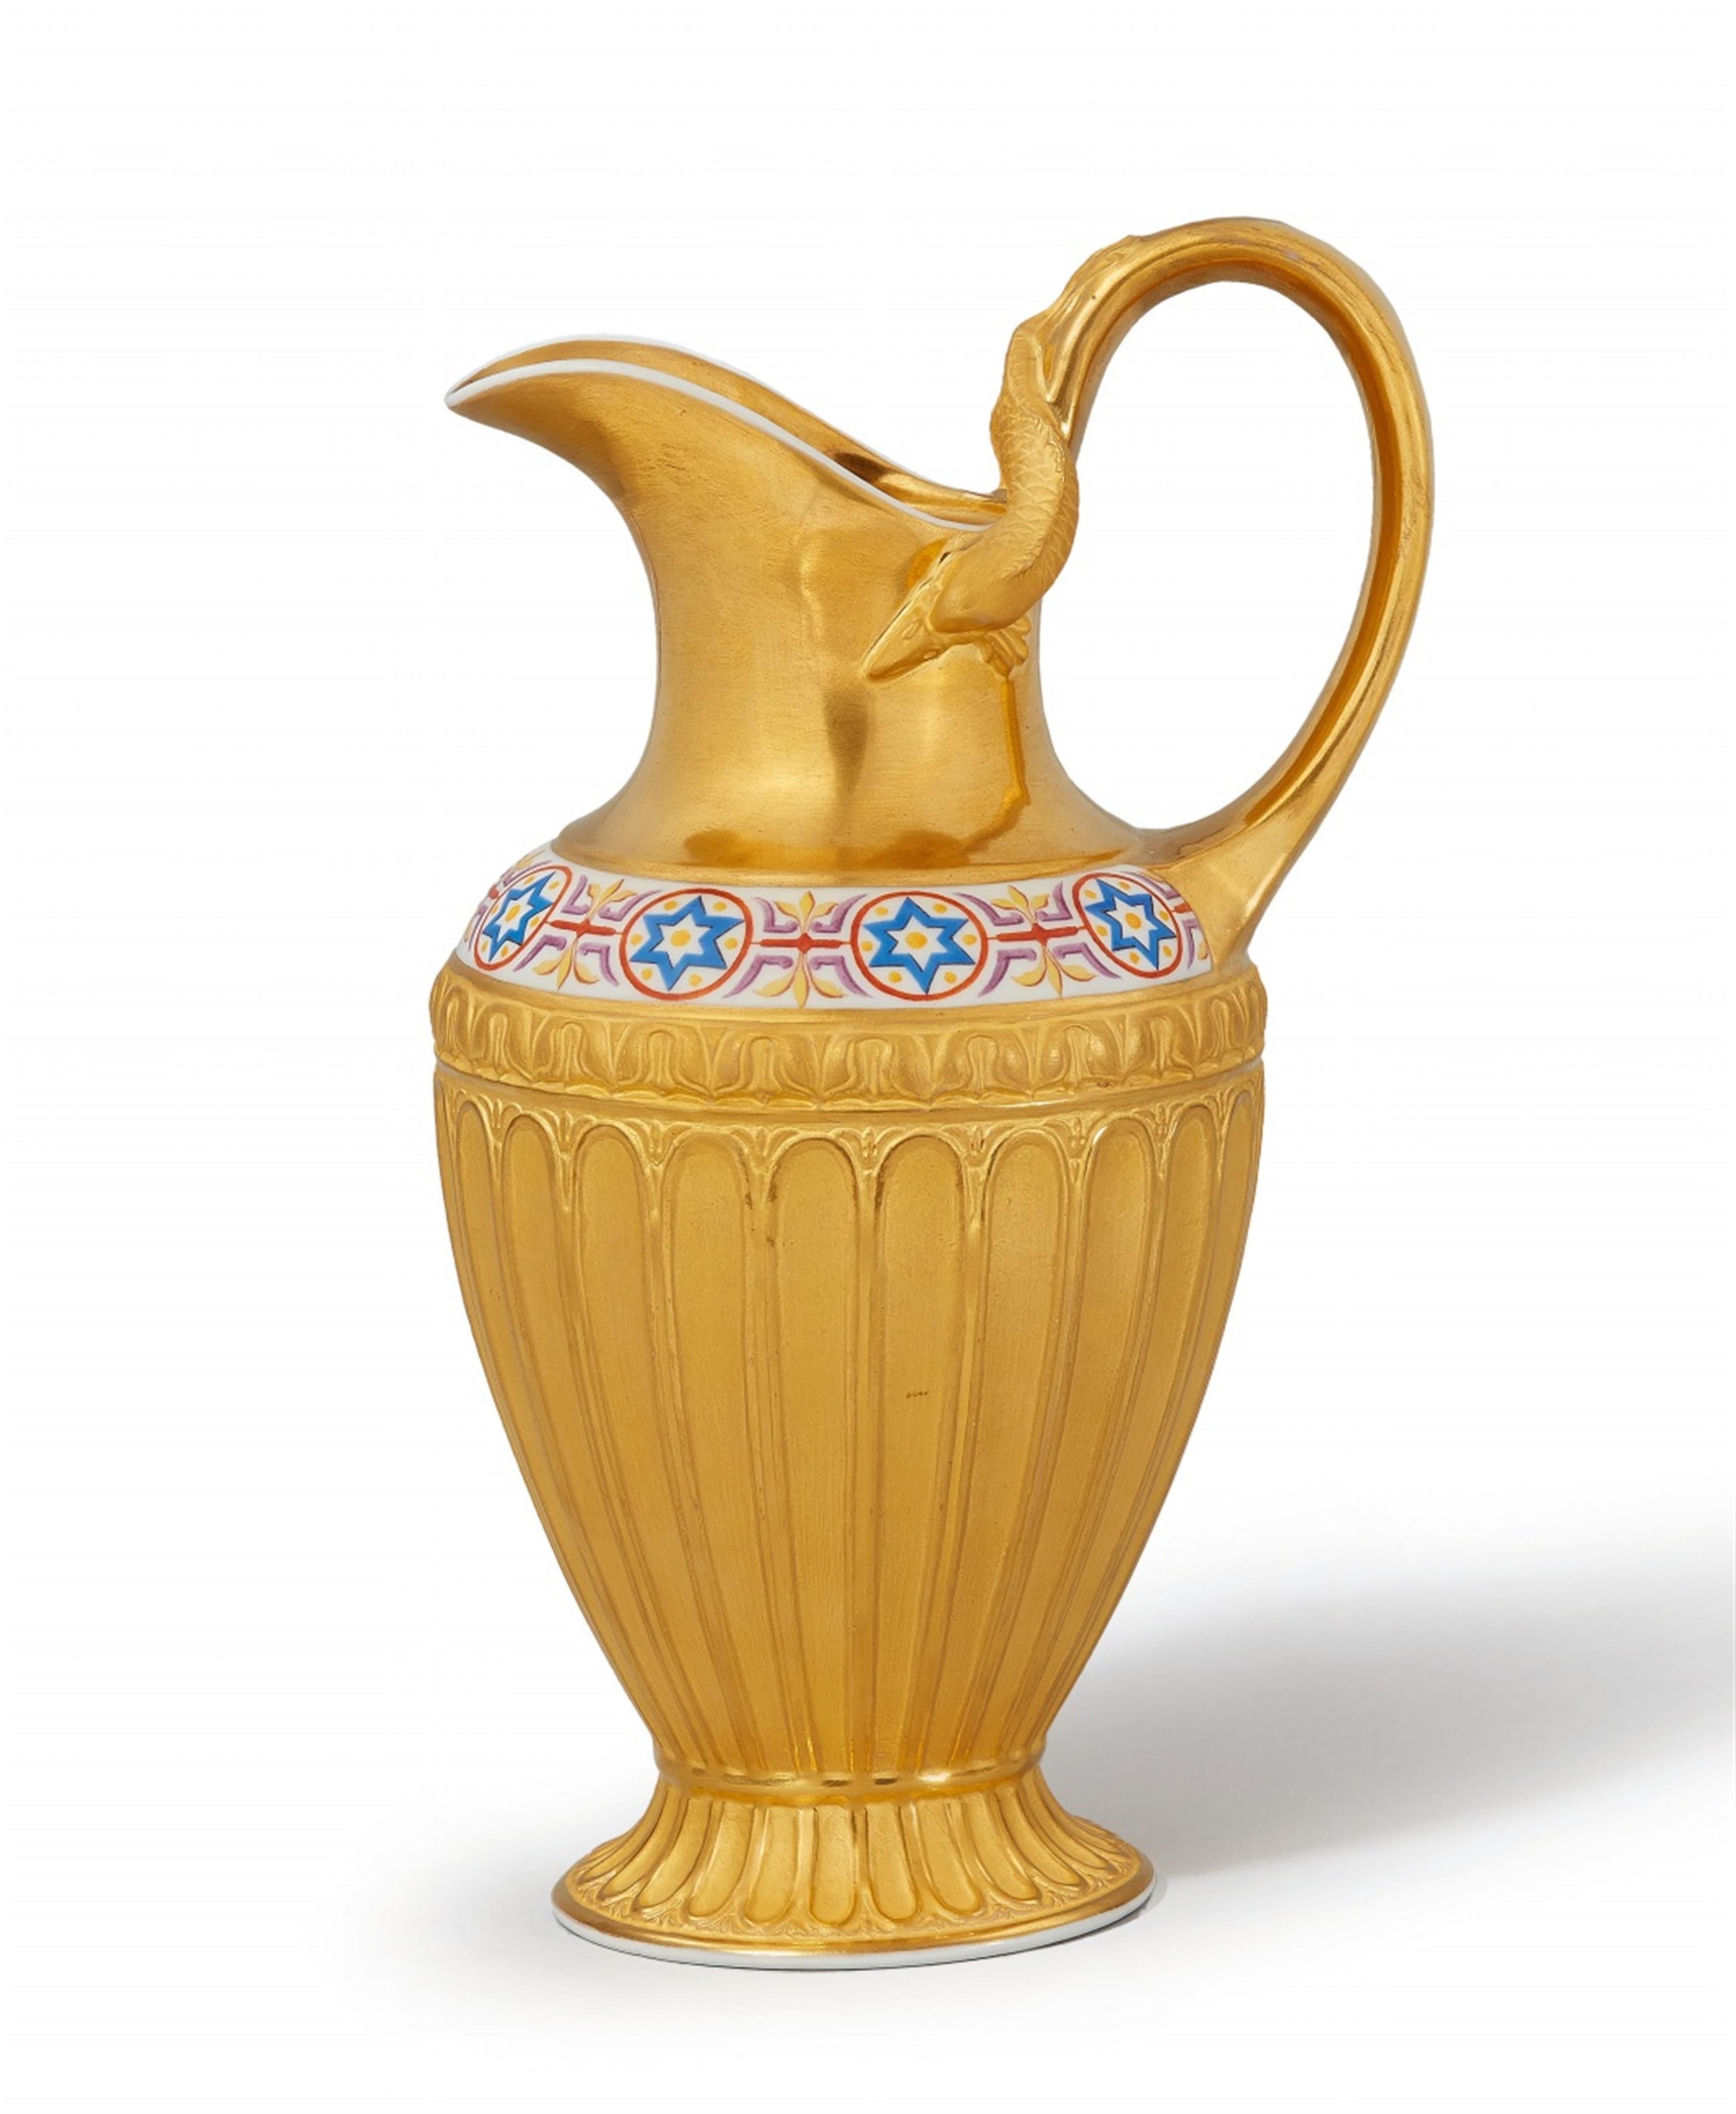 An unusual Neoclassical Berlin KPM porcelain pitcher with gold ground - image-1